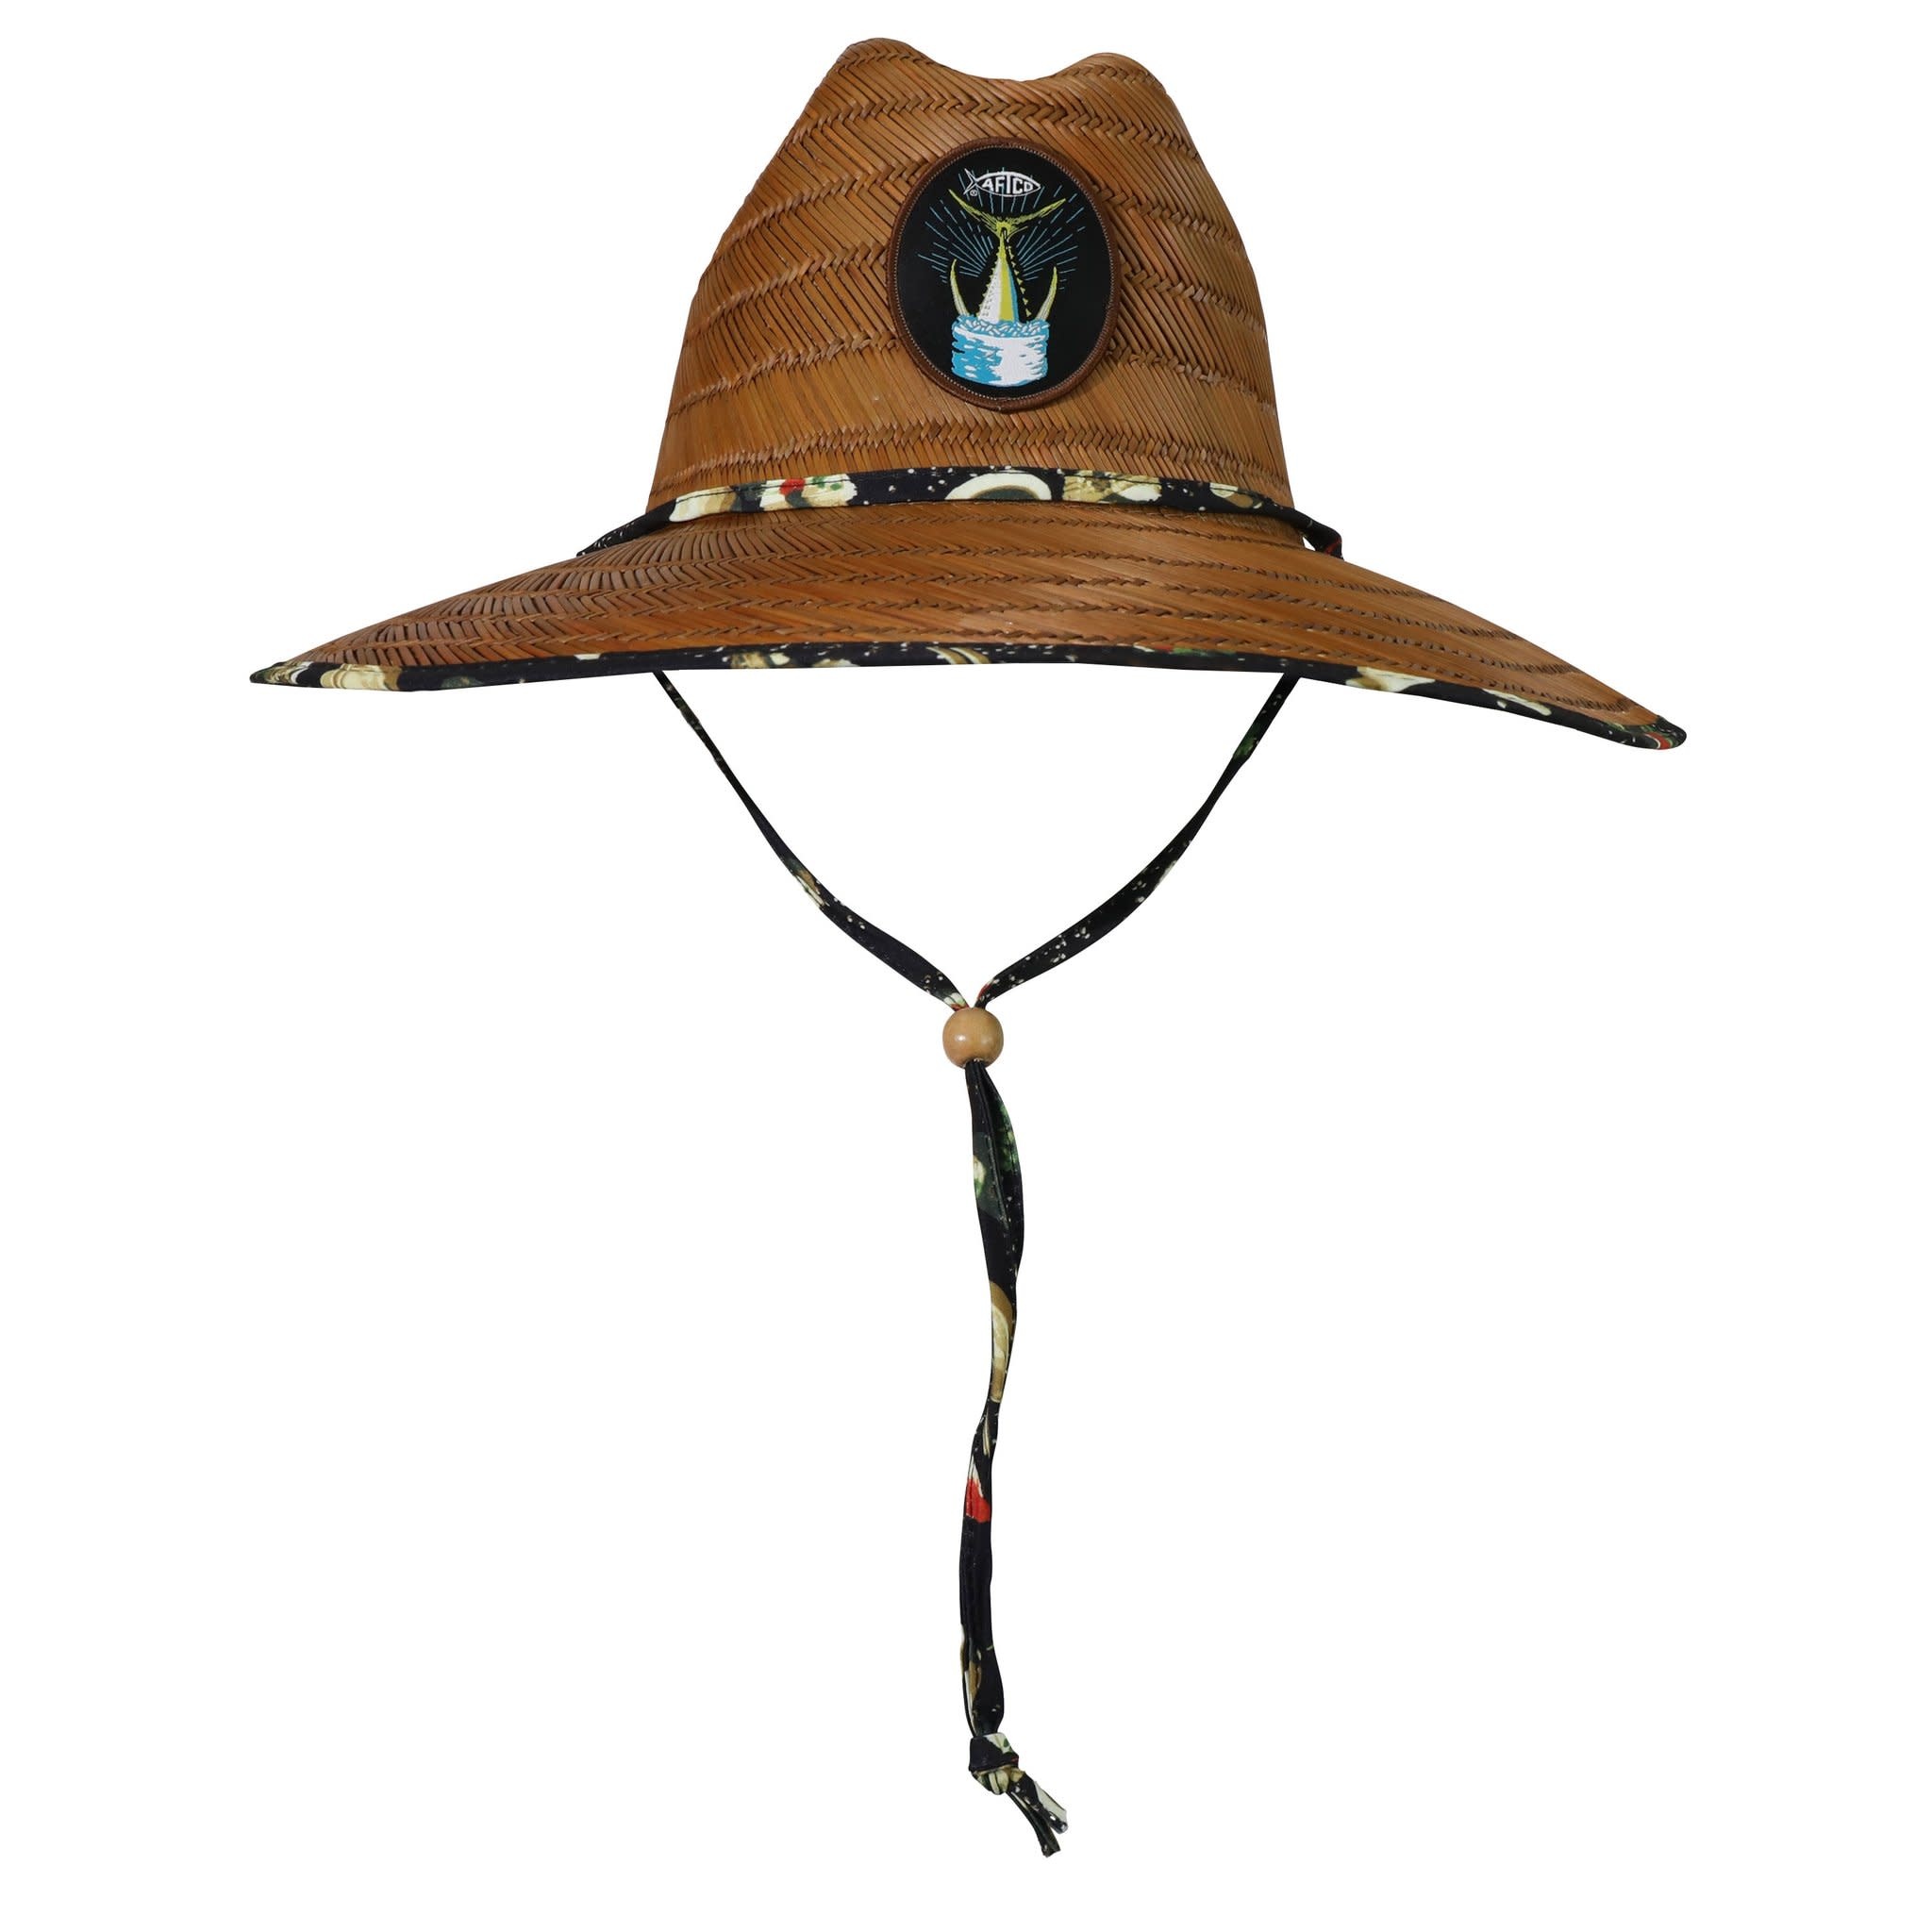 Aftco Aftco Sushi Straw Hat, Brown